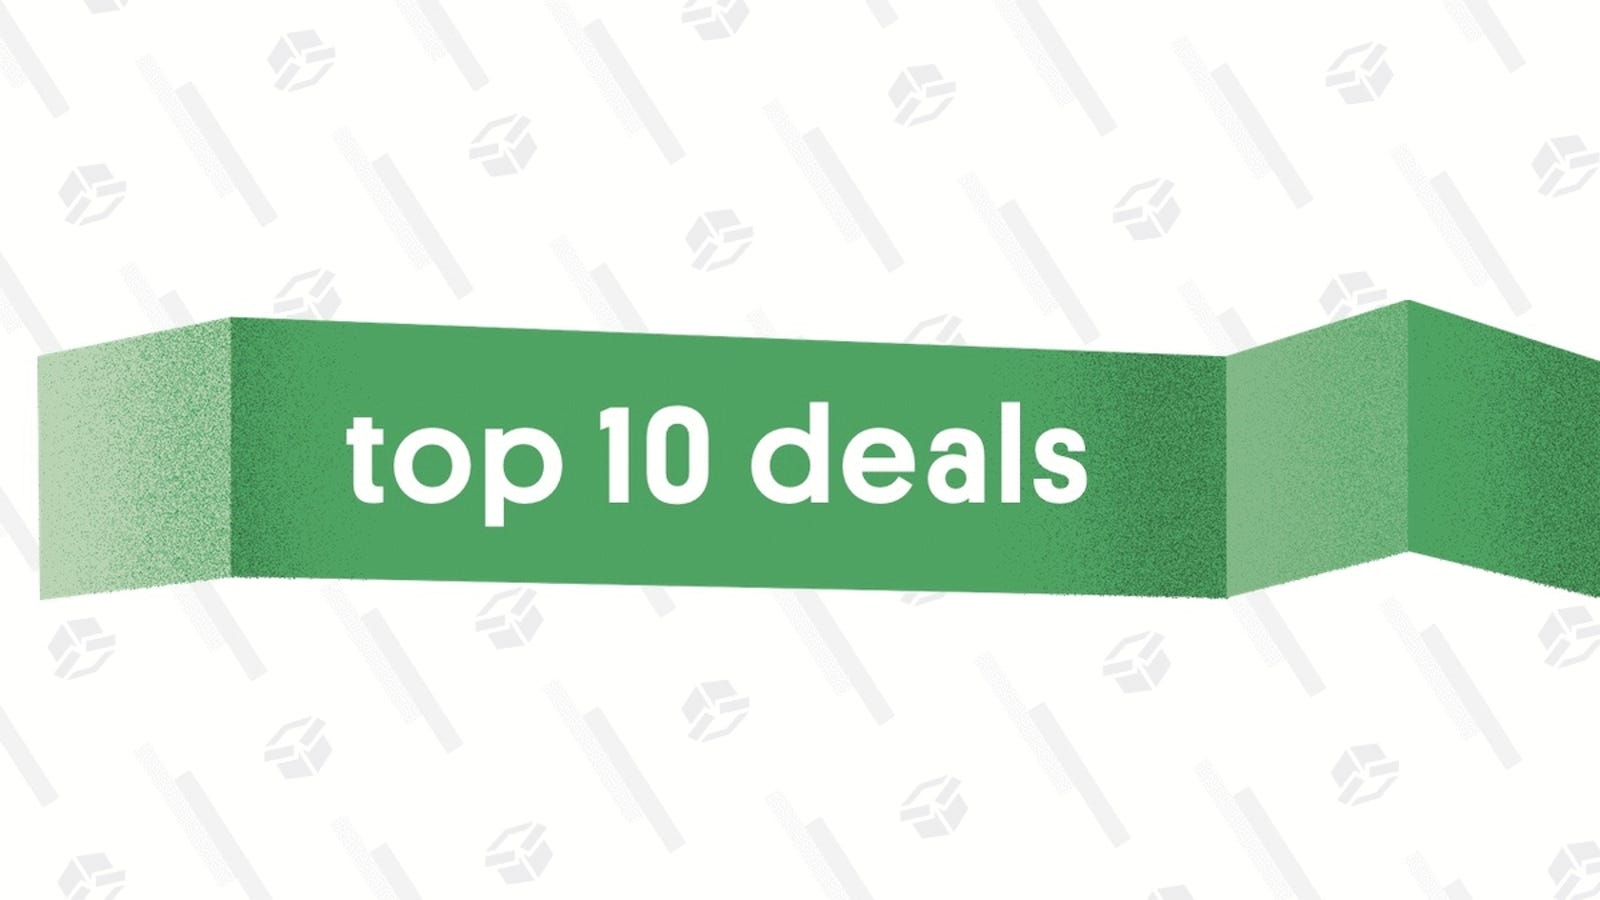 photo of The 10 Best Deals of October 19, 2018 image